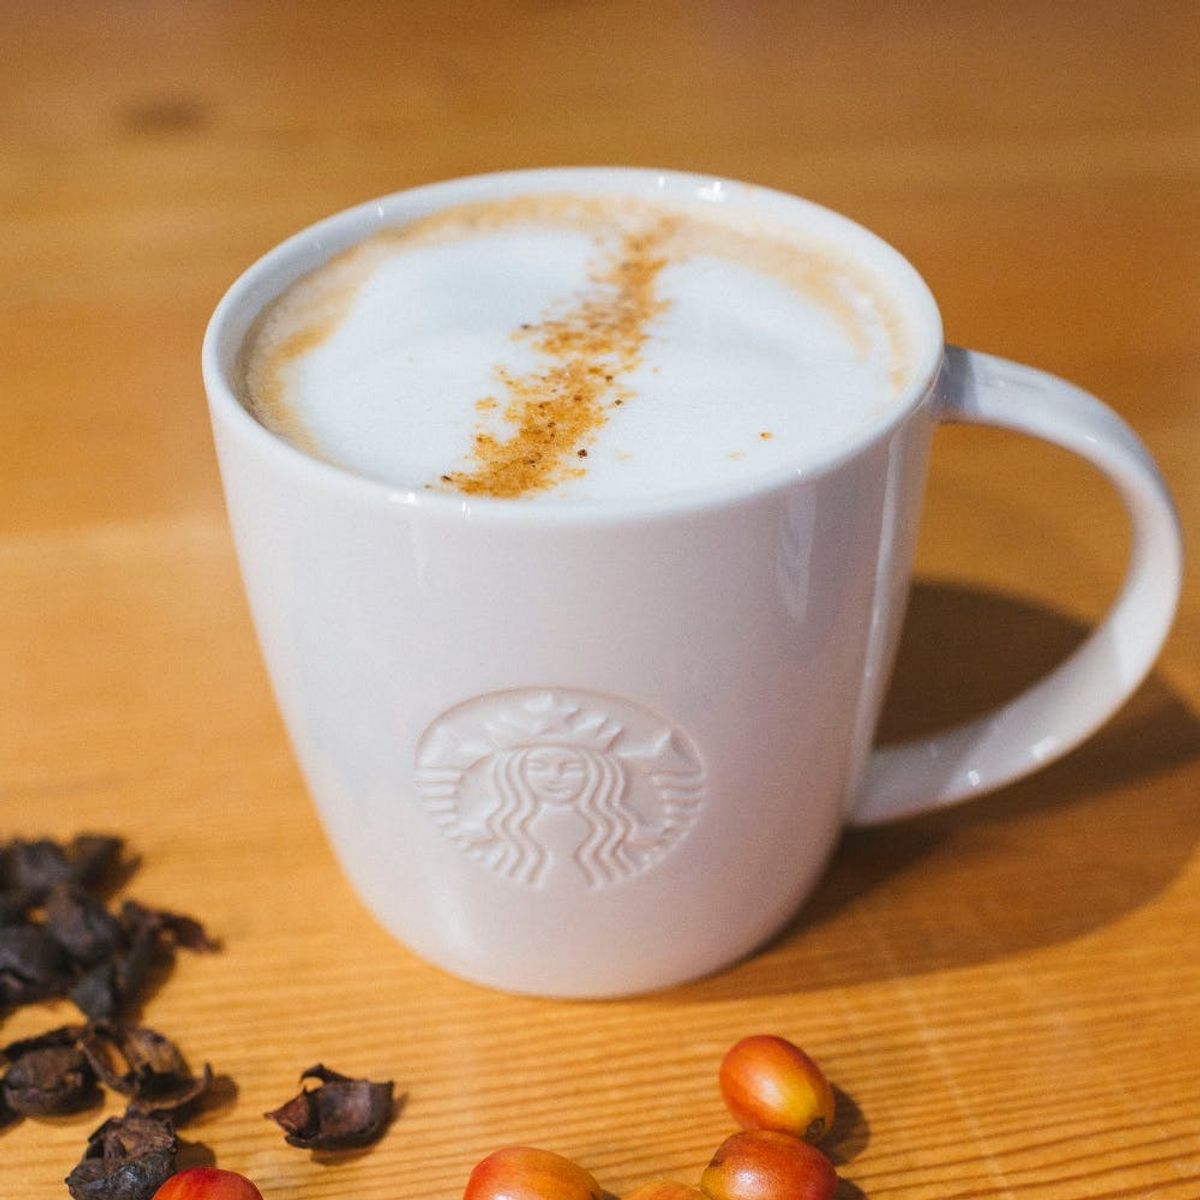 Starbucks’ First New Beverage of 2017 Is the Cascara Latté